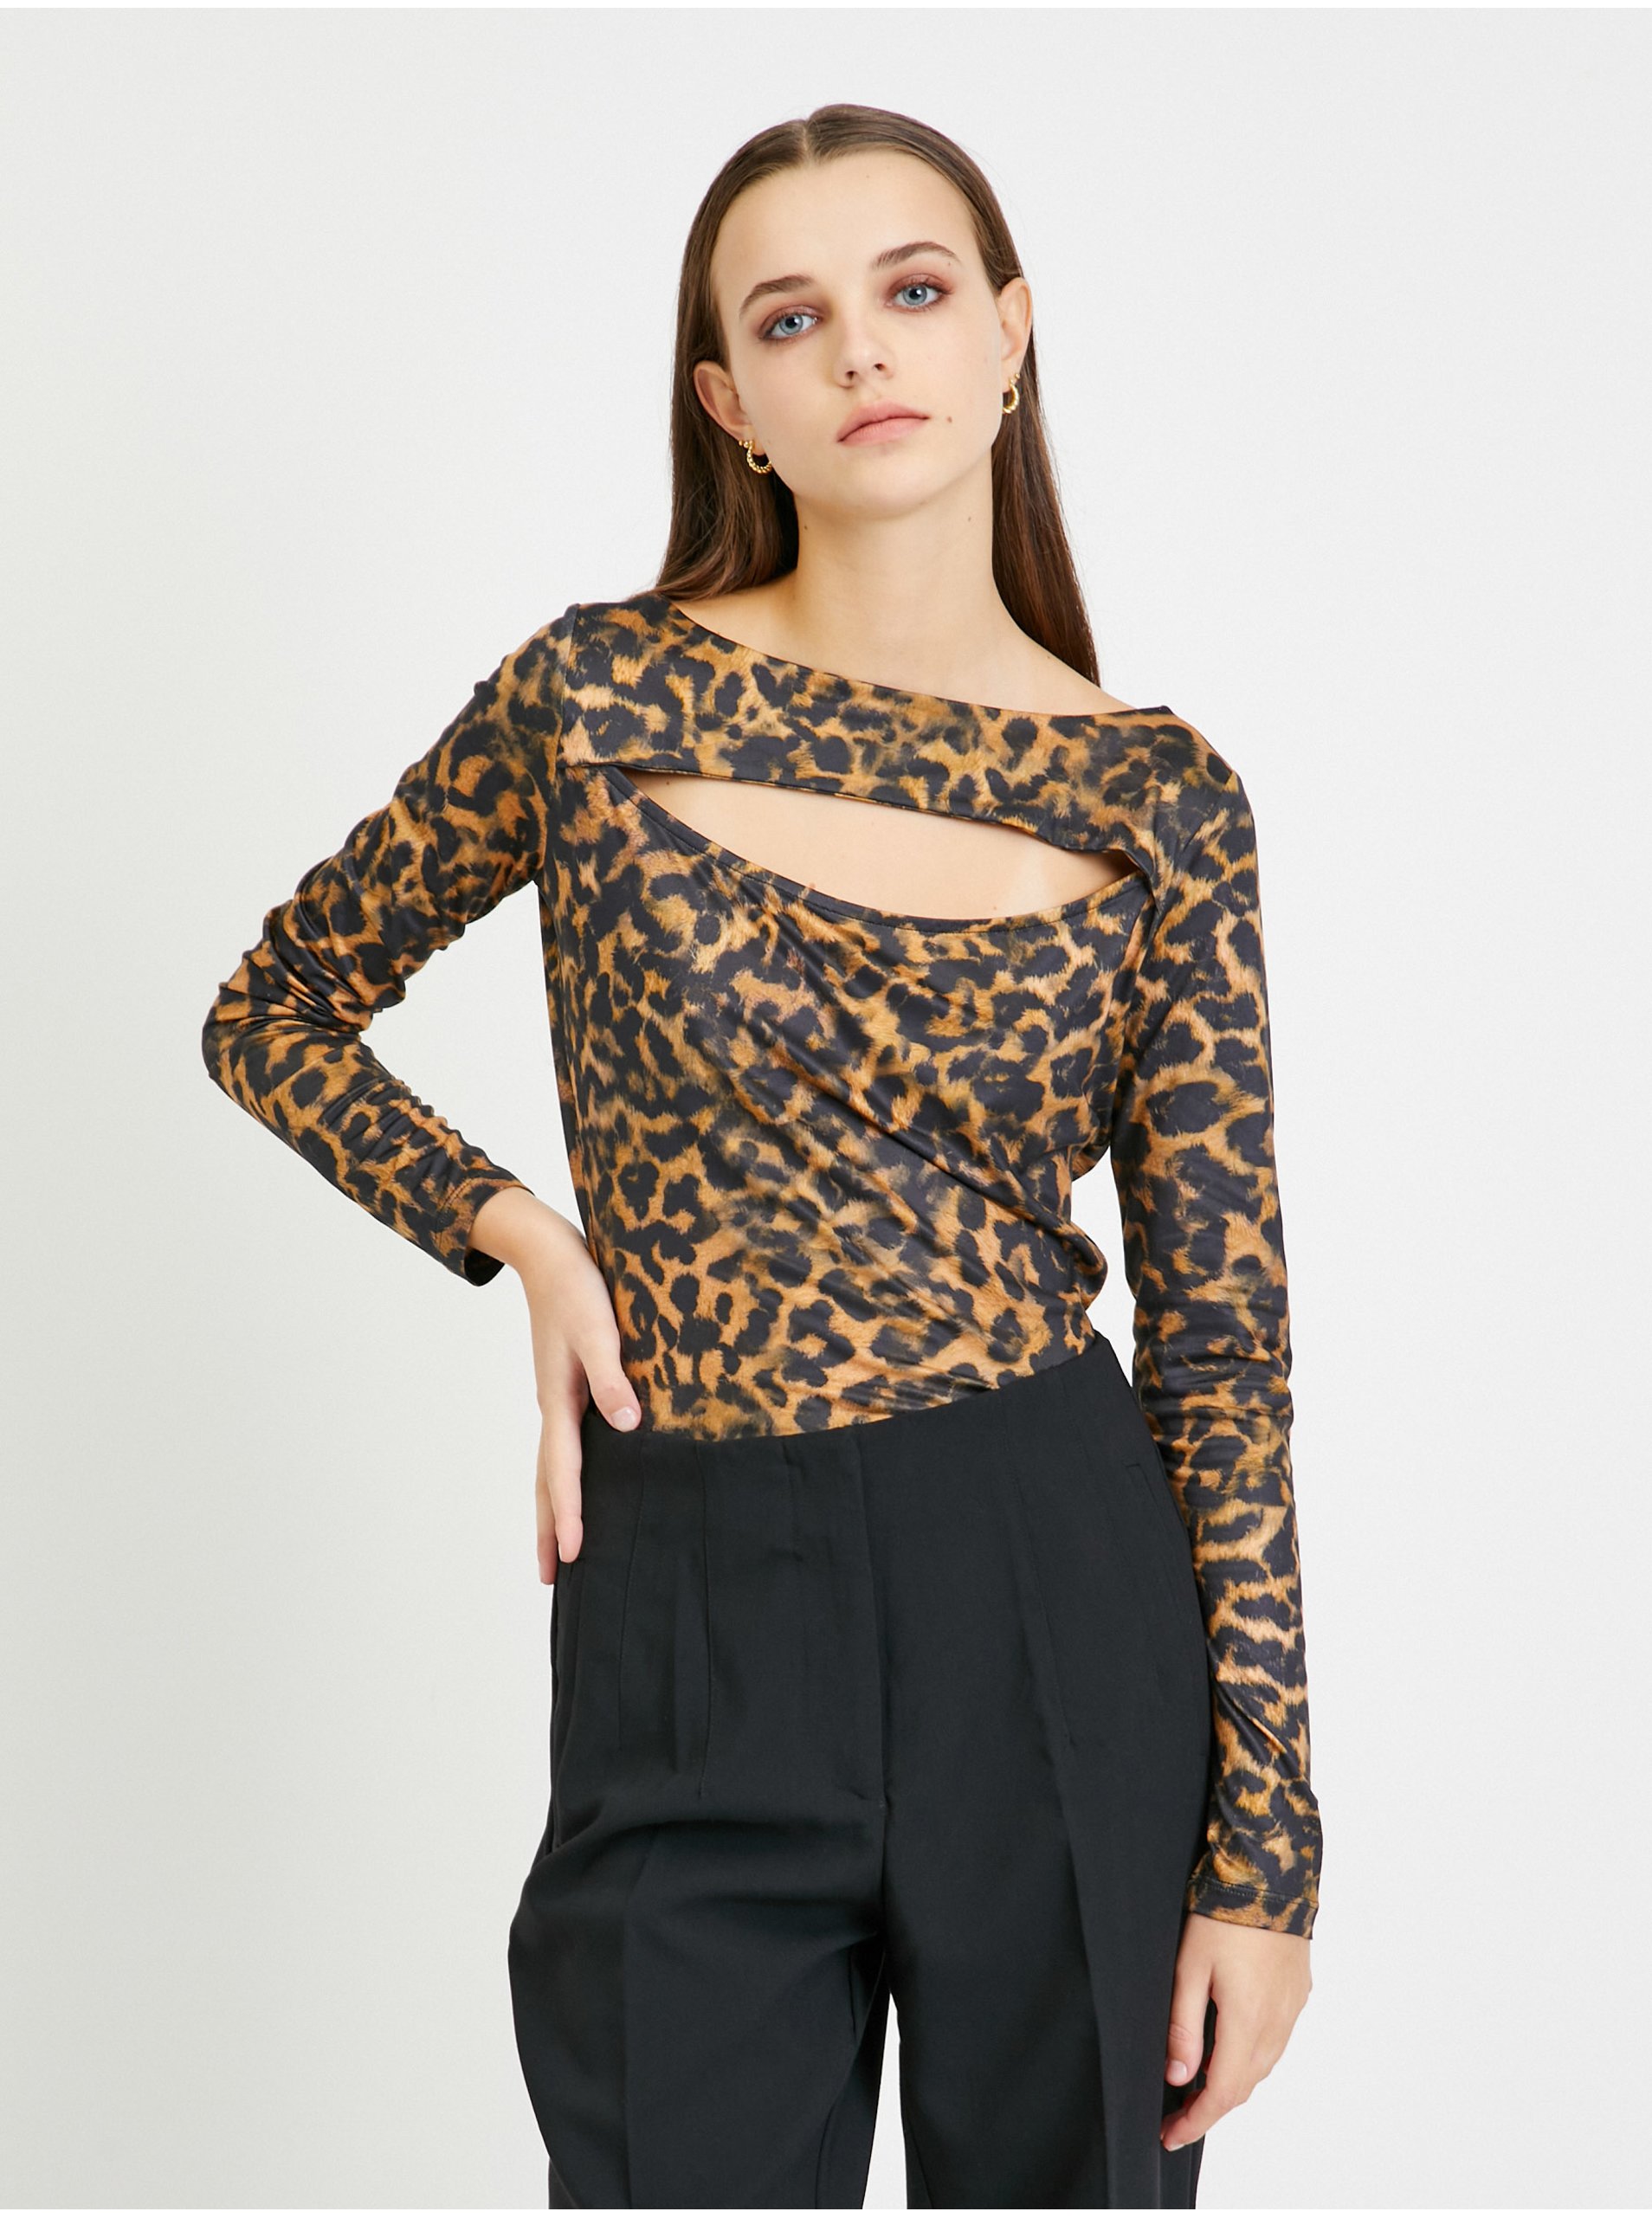 Eivy Ice Cold base layer leggings in snow leopard Exclusive at ASOS